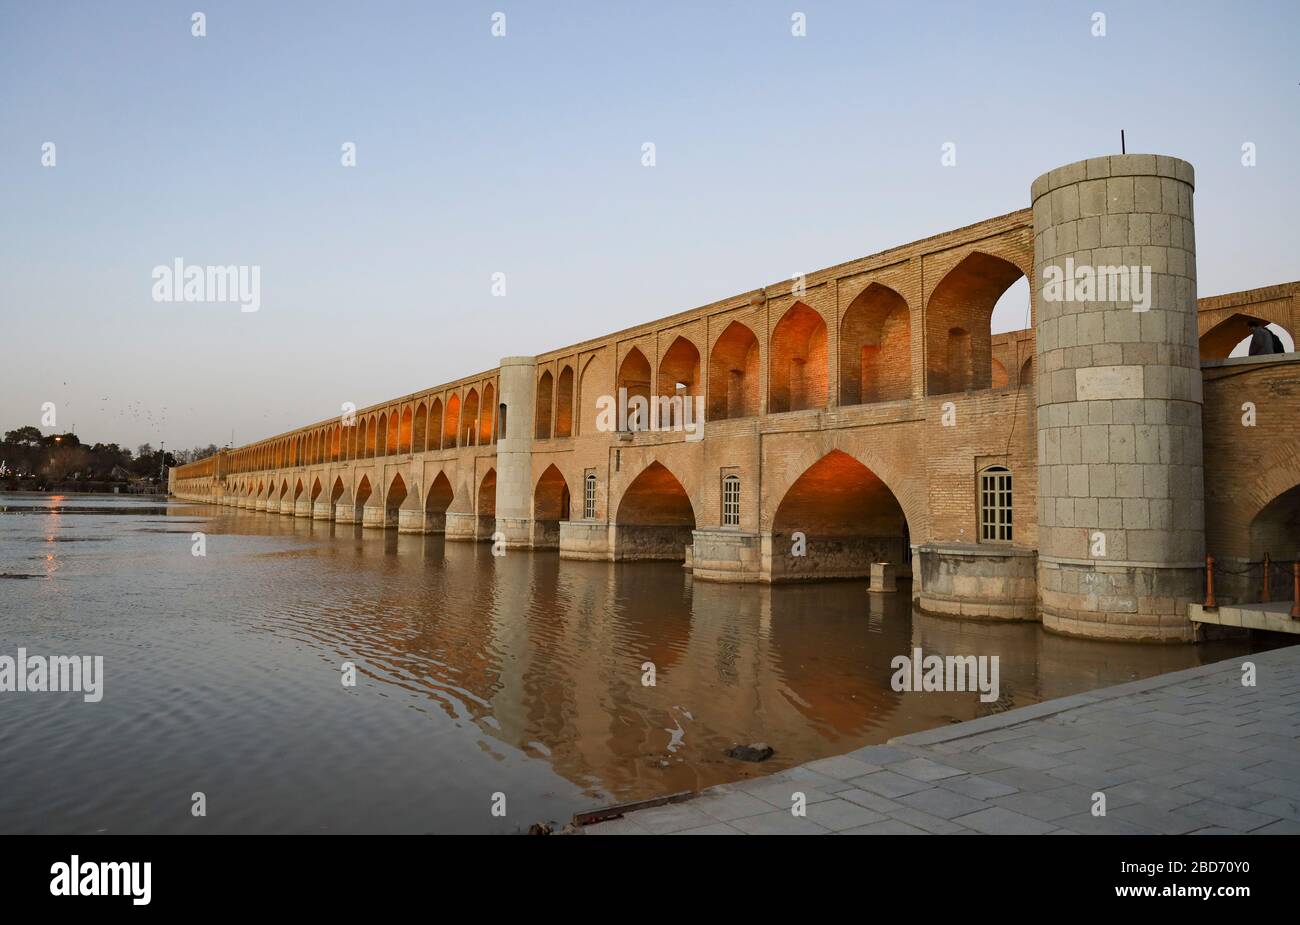 View of Allahverdi Khan Bridge (Si-o-Se Pol 33 Arches Bridge) over the Zayandeh River, Isfahan, Esfahan Province, Iran, Middle East Stock Photo